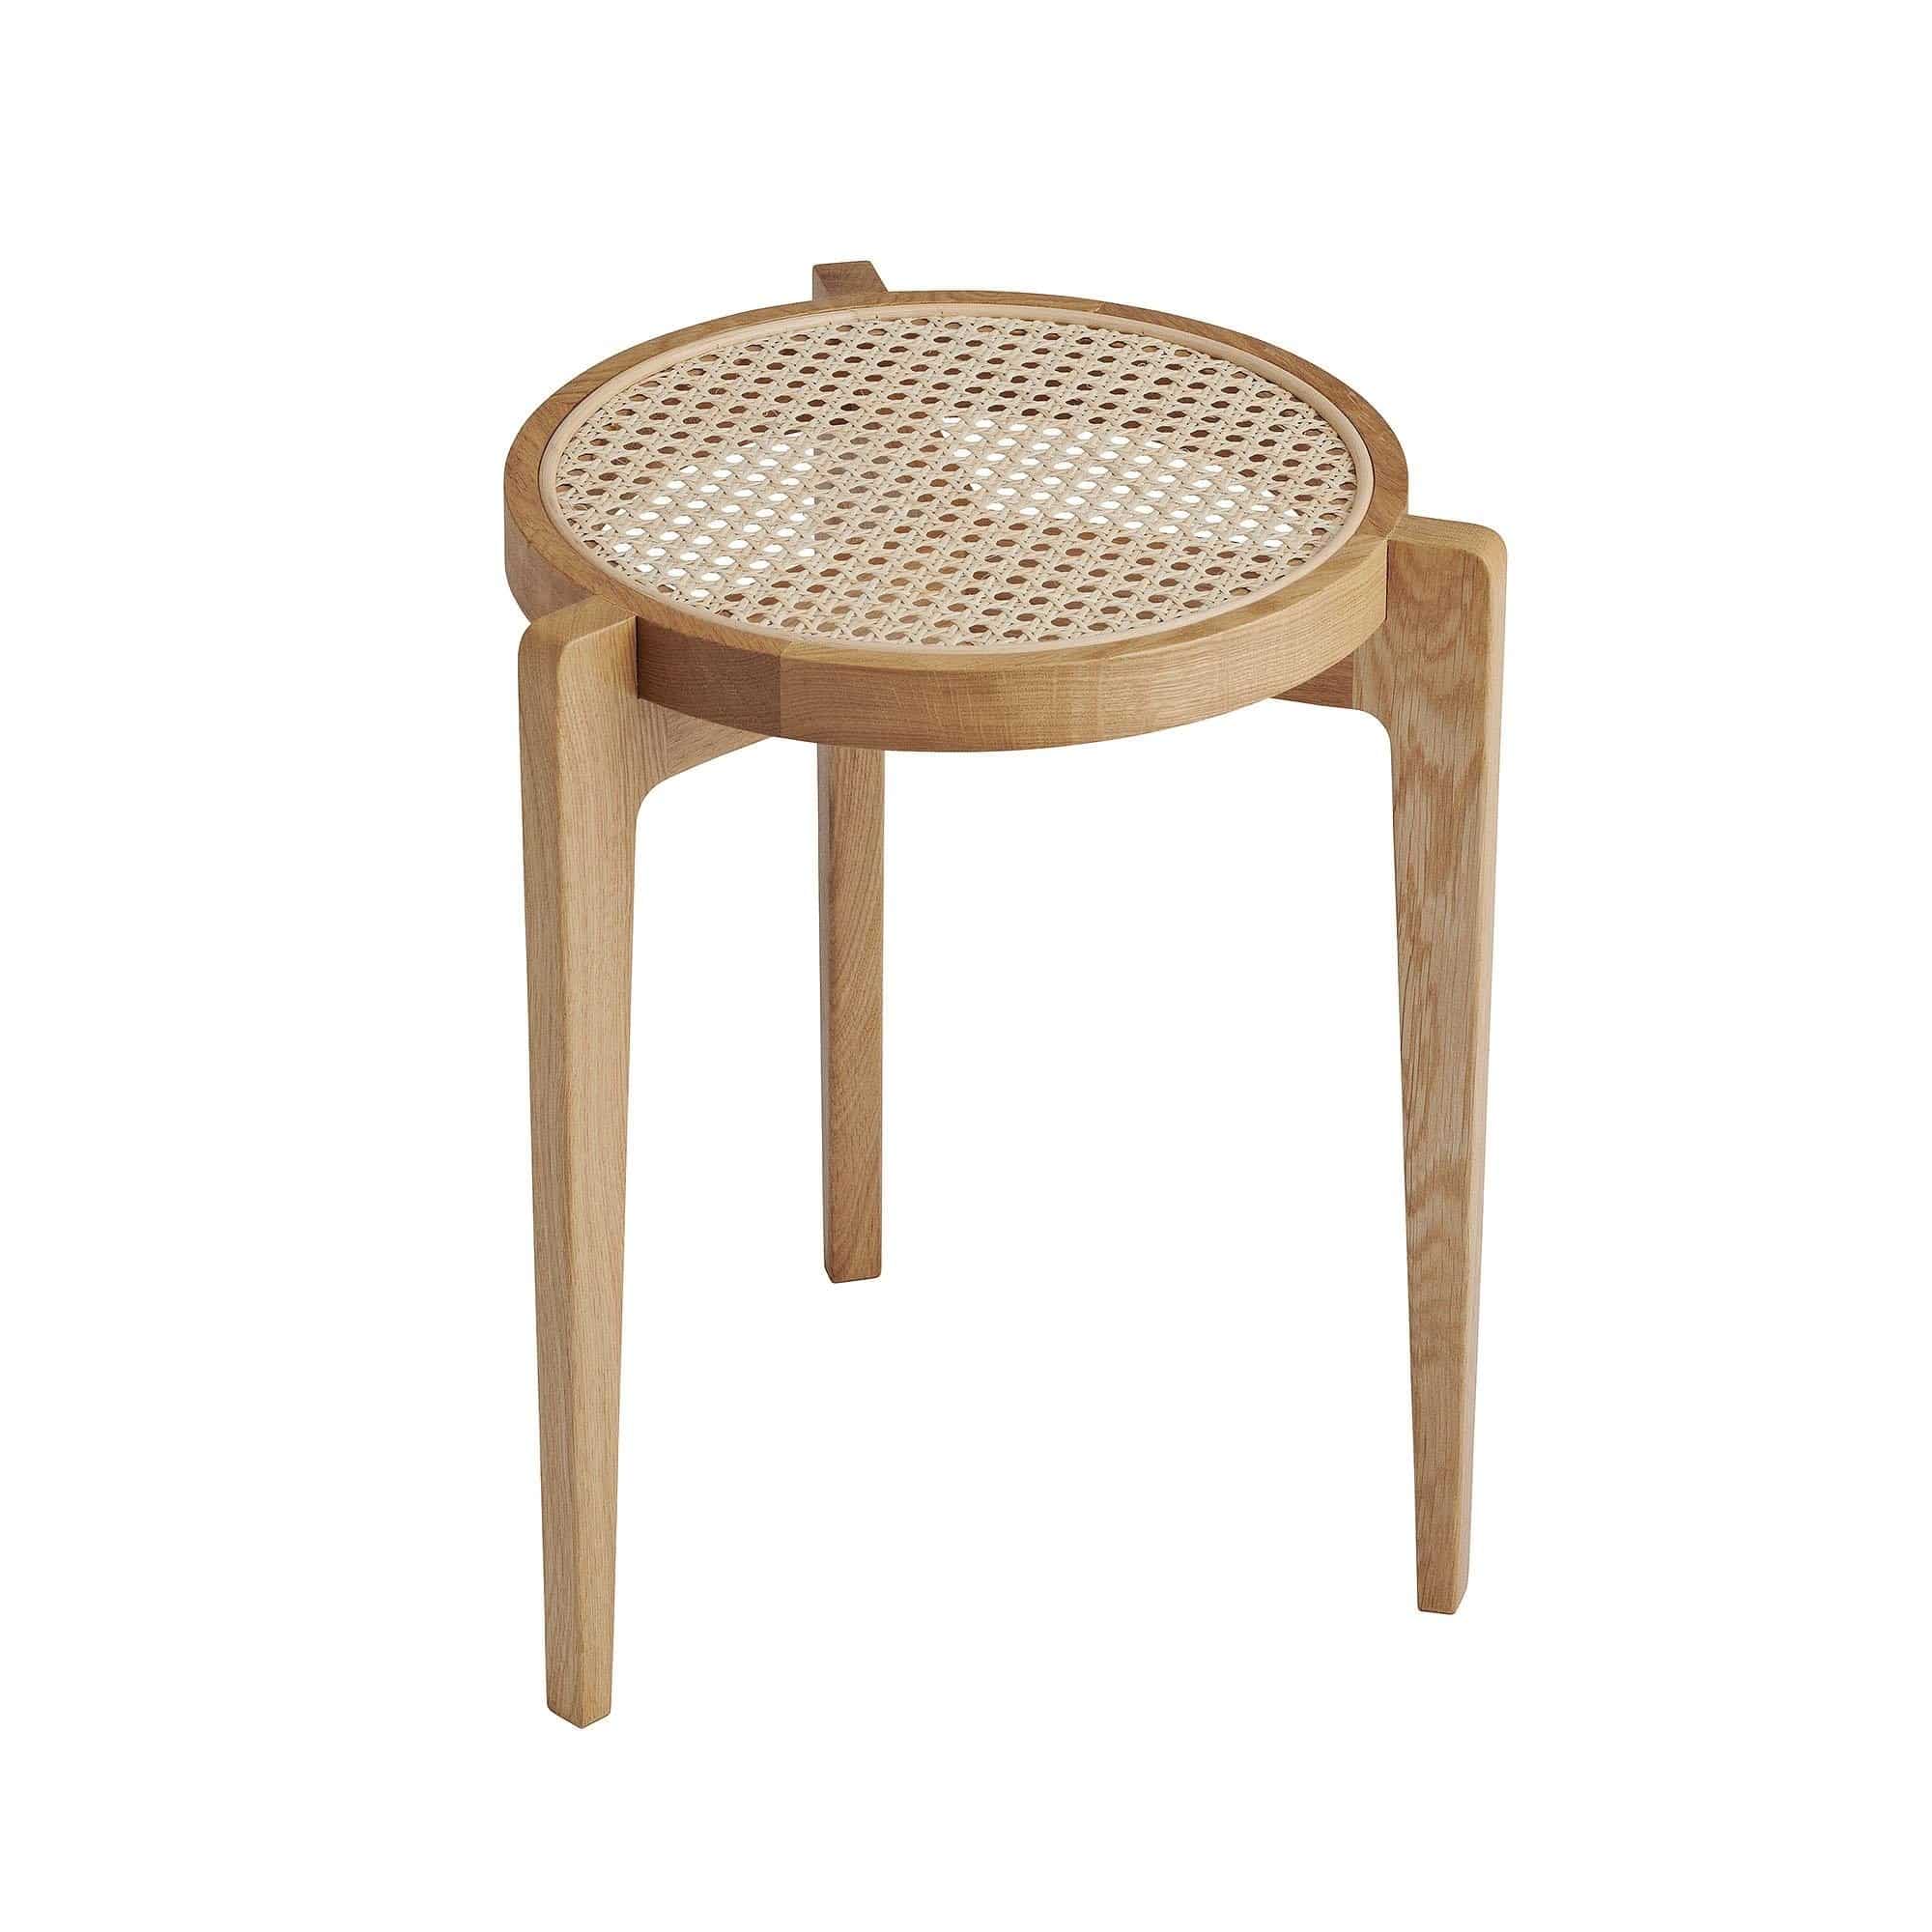 Le Roi Stool - THAT COOL LIVING